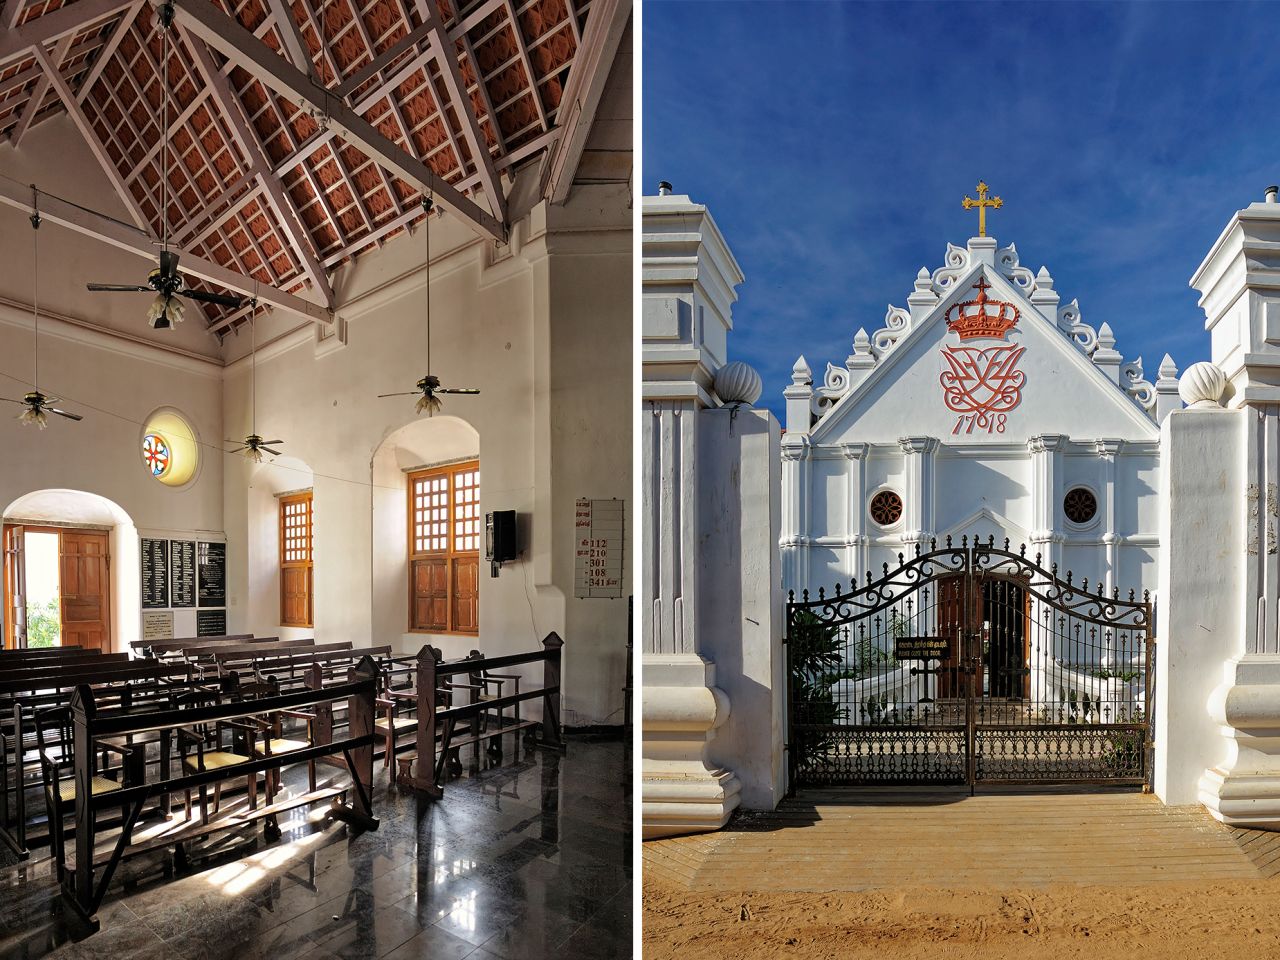 Interior of a New Jerusalem Church, in Tranquebar state Tamil Nadu India

The New Jerusalem Church was built in 1718 by the Royal Danish missionary Bartholomaeus Ziegenbalg in the coastal town of Tranquebar state Tamil Nadu India which was at that time a Danish India colony